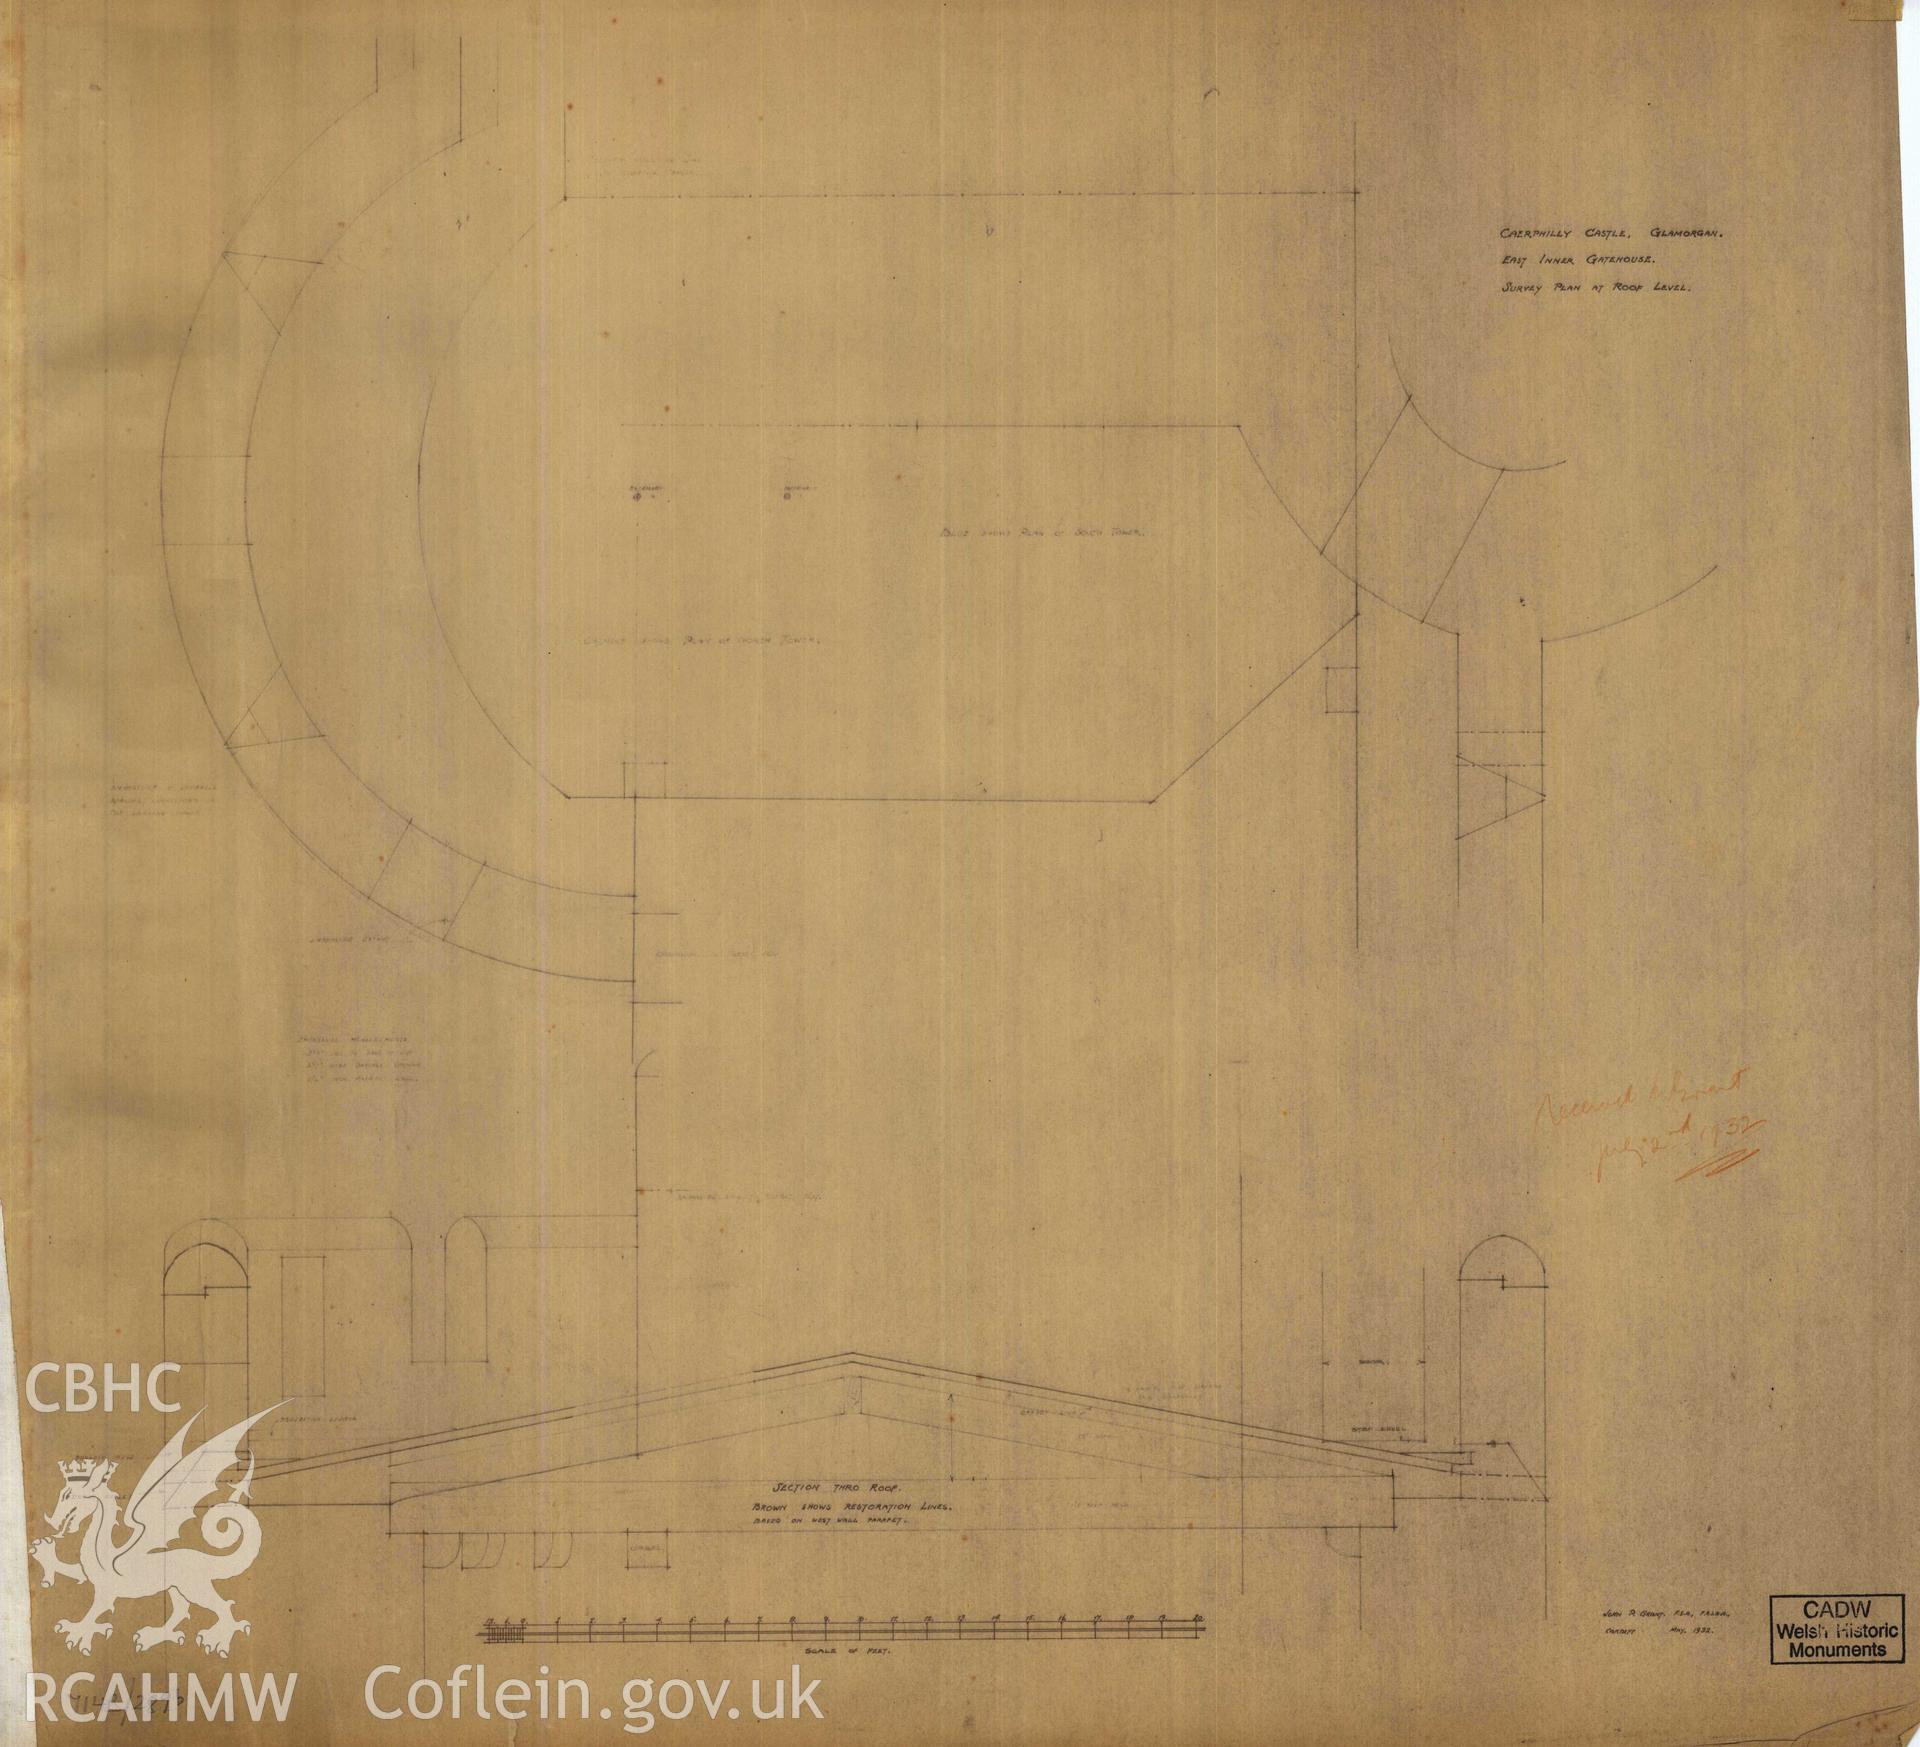 Cadw guardianship monument drawing of Caerphilly Castle. Inner E gate, roof plan (pt) +sect. Cadw Ref. No:714B/289b. Scale 1:24.